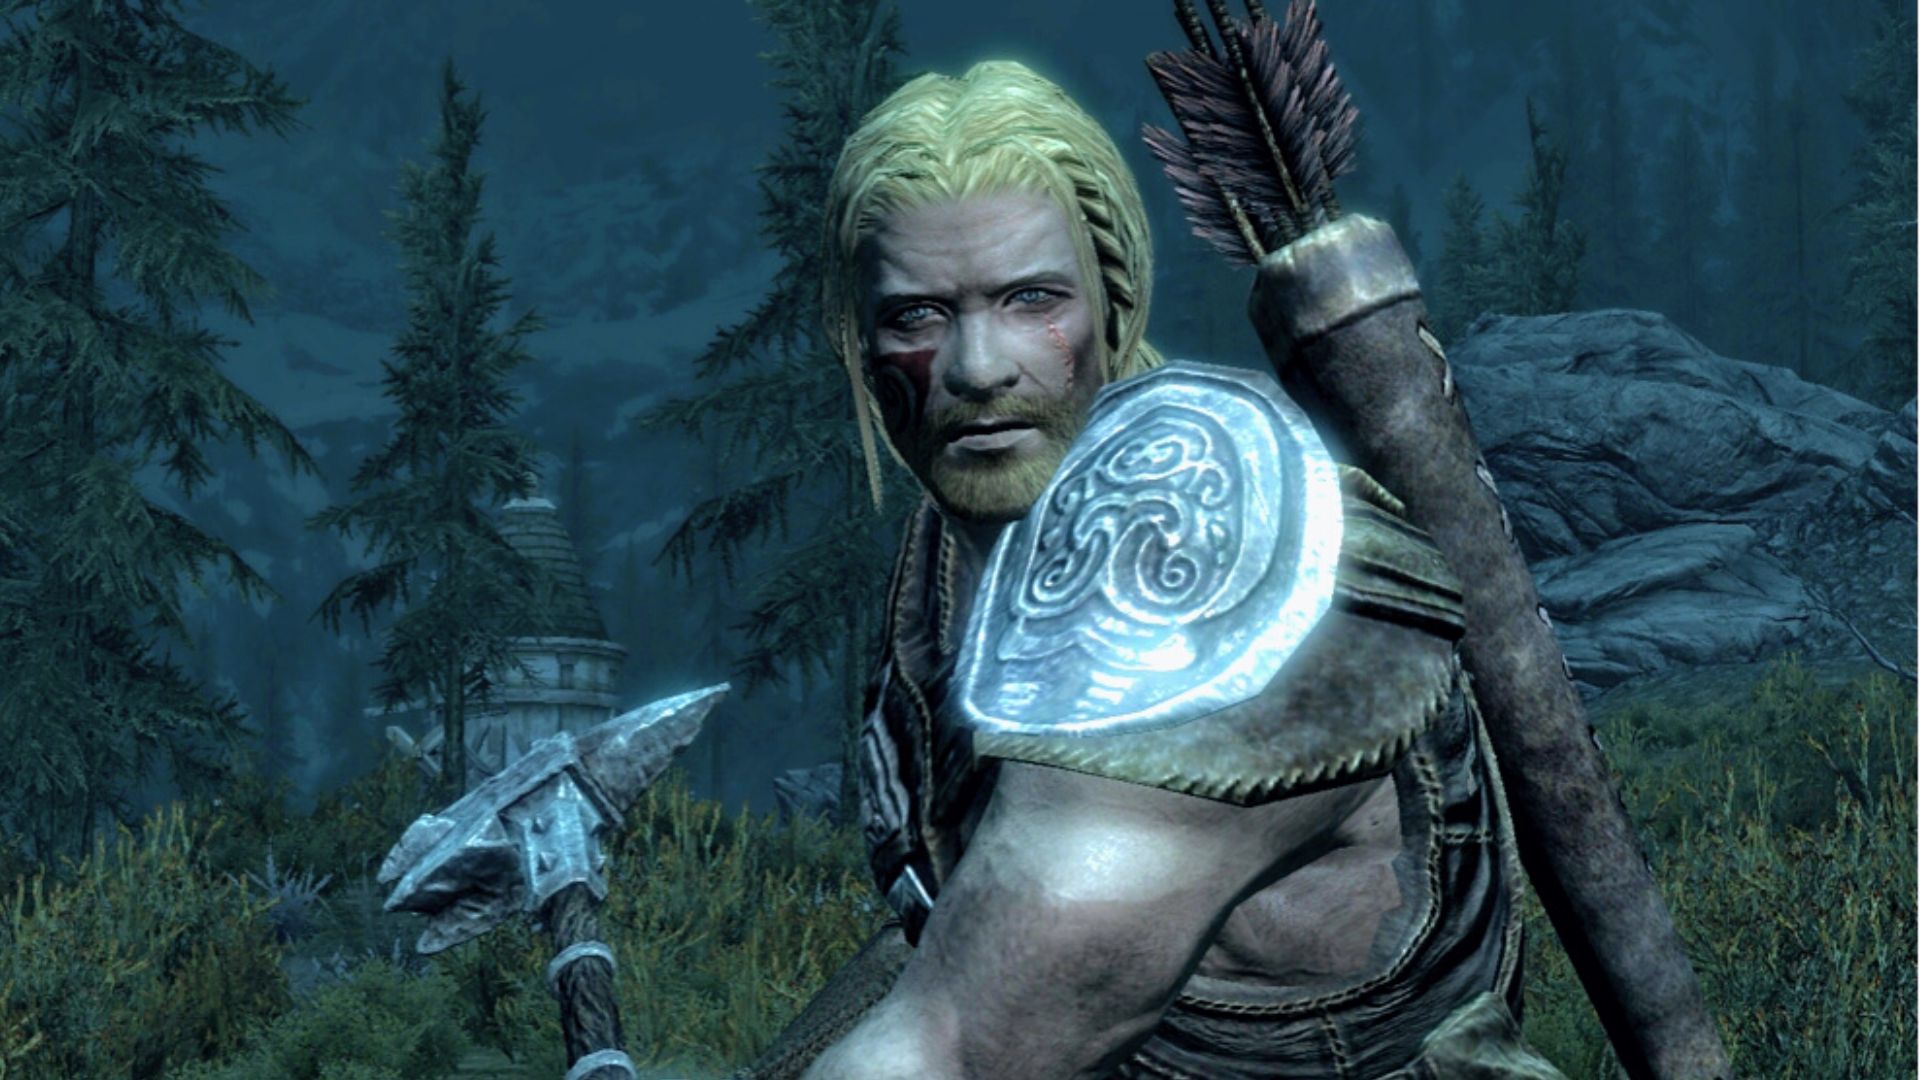 Sex appeal Skyrim mod helps you get laid, but only in the fantasy game